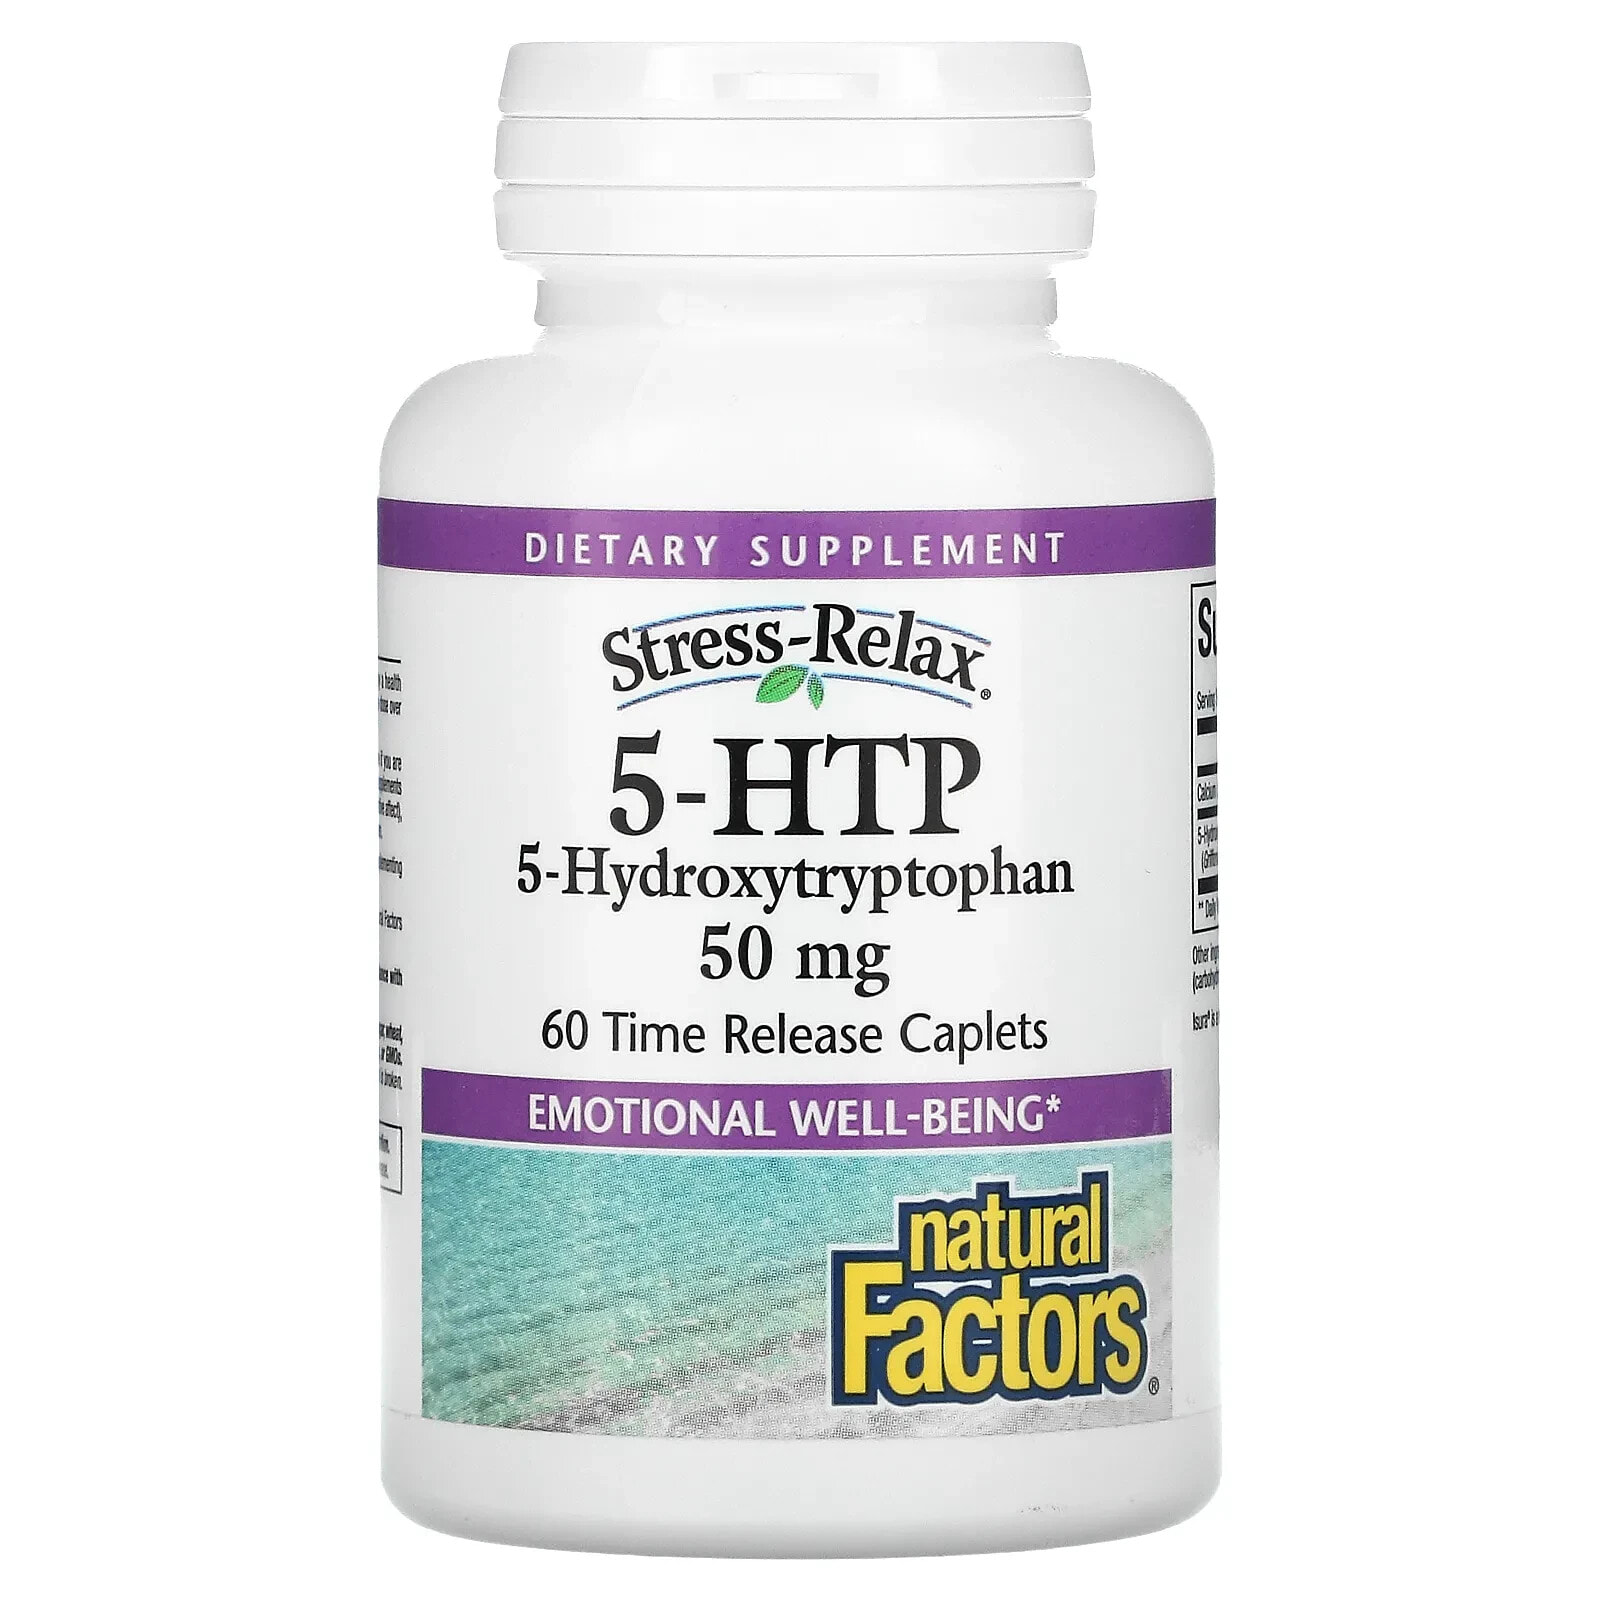 Stress-Relax, 5-HTP, 50 mg, 60 Time Release Caplets